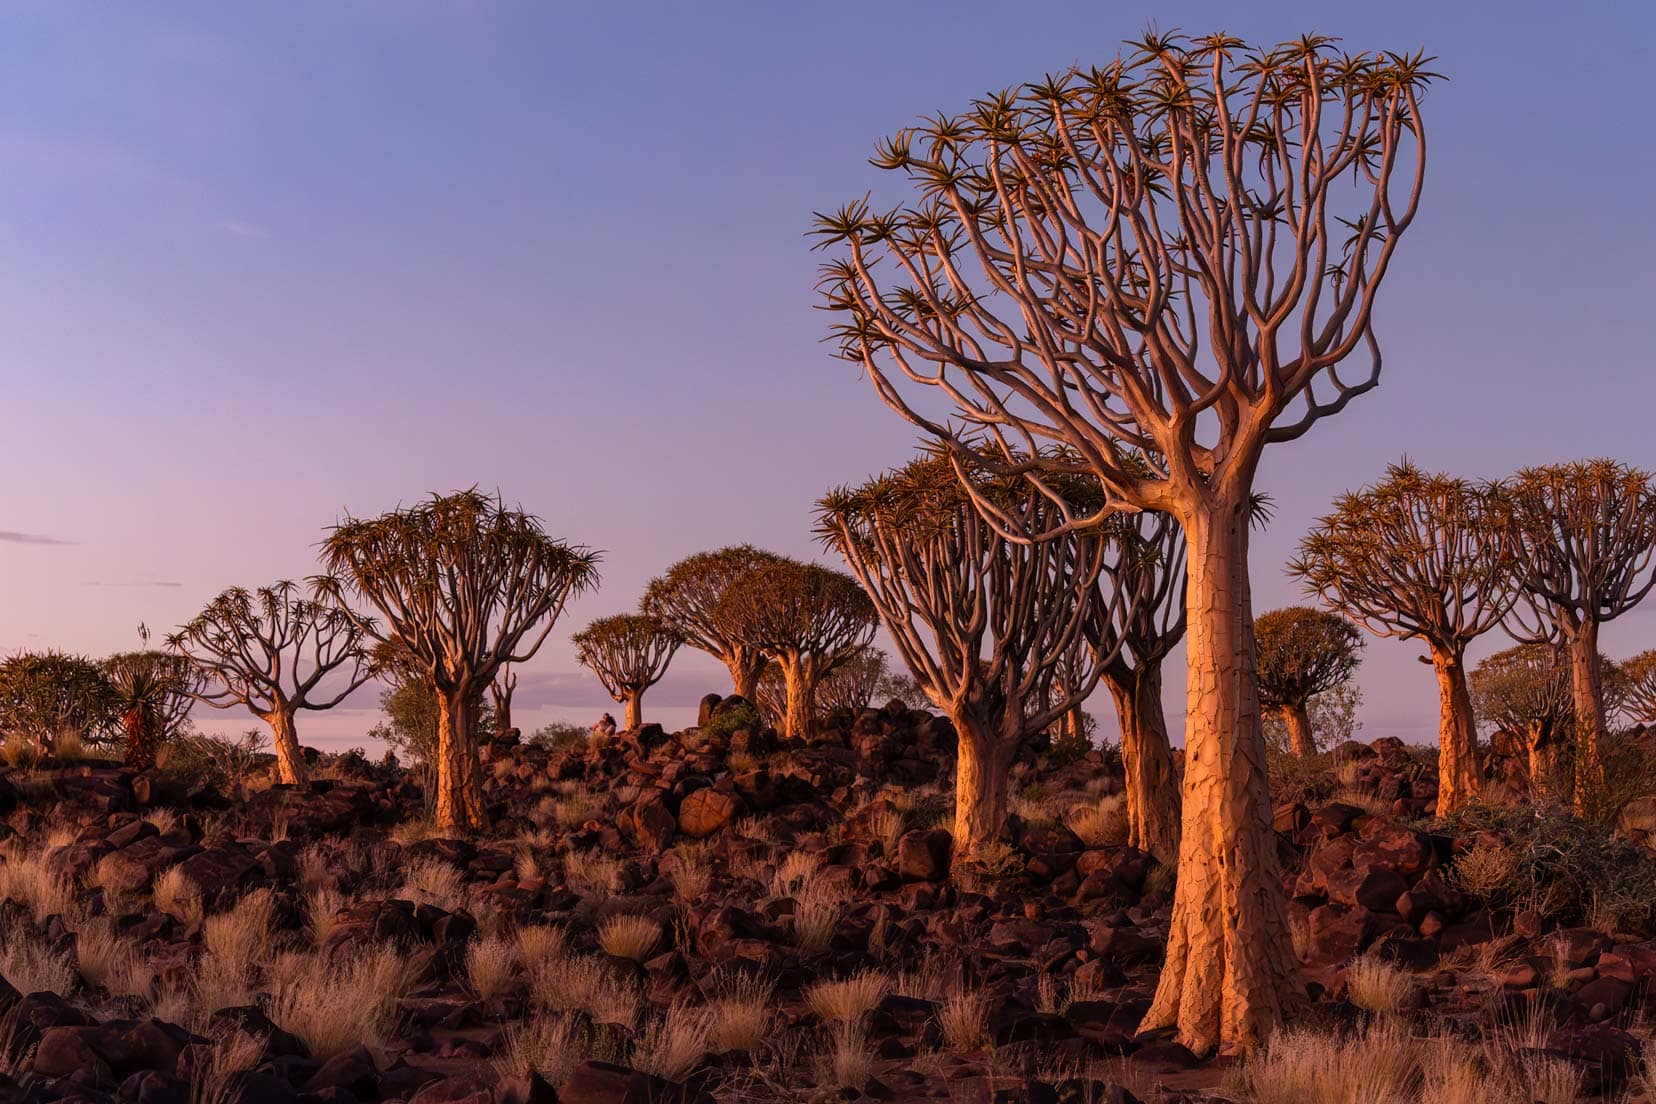 Quiver tree forest at sunset with golden reflections on the tree trunks